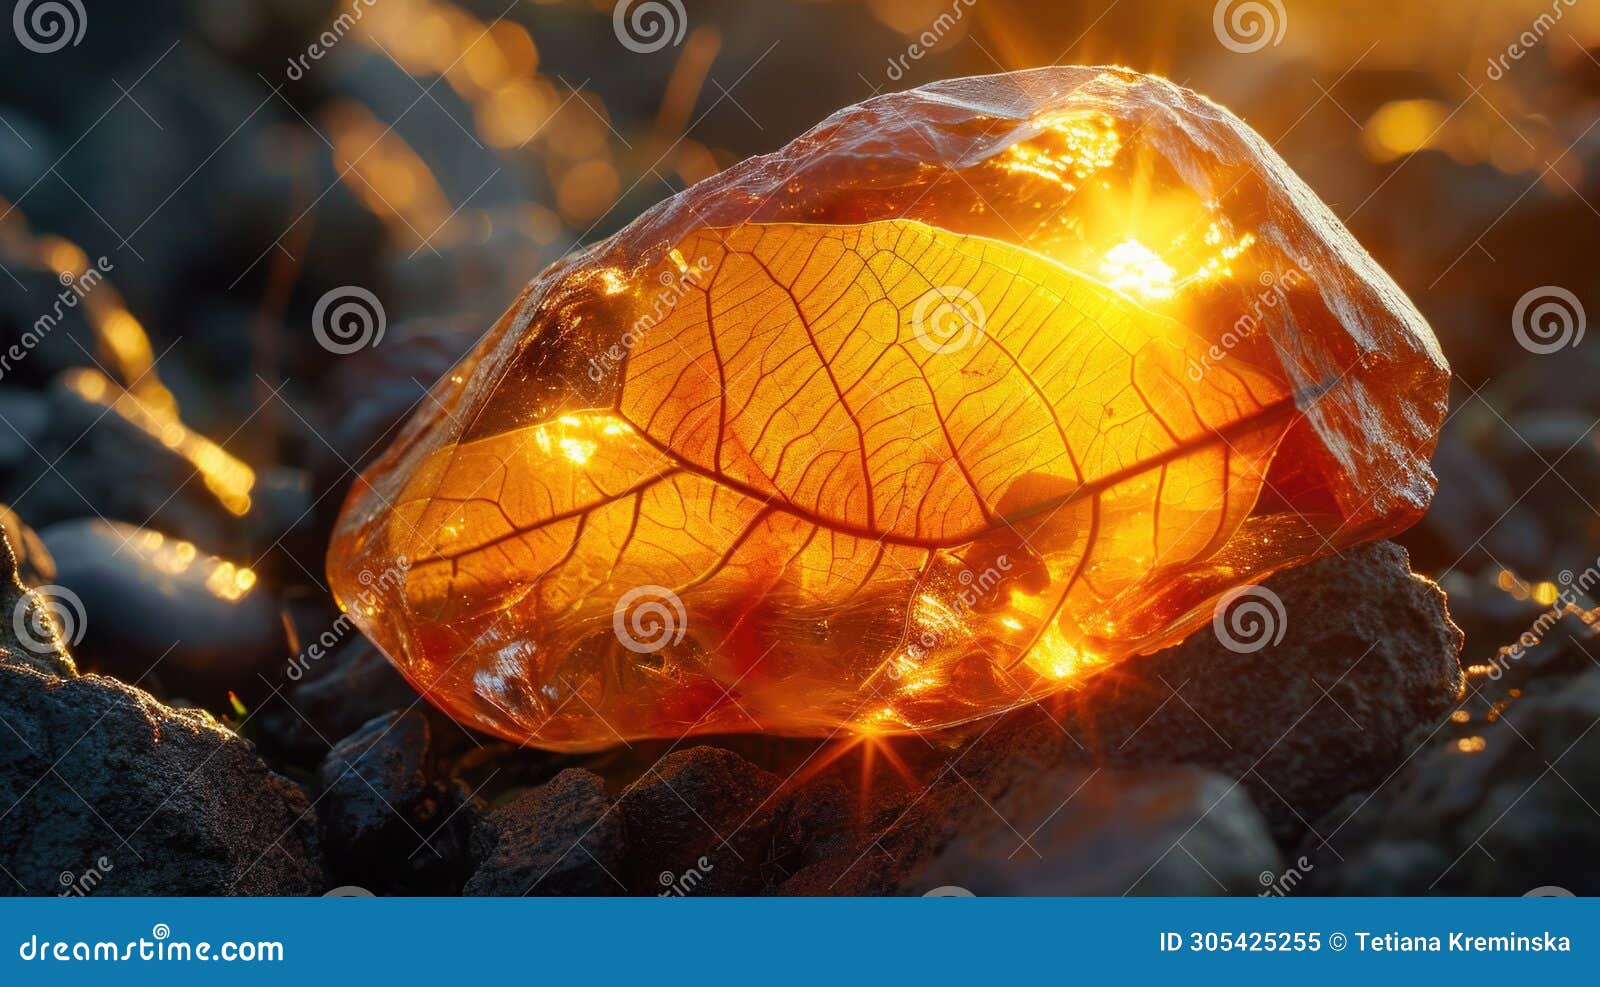 a radiant amber stone, sunlight passing through to reveal a delicate prehistoric leaf trapped for millennia, the warm